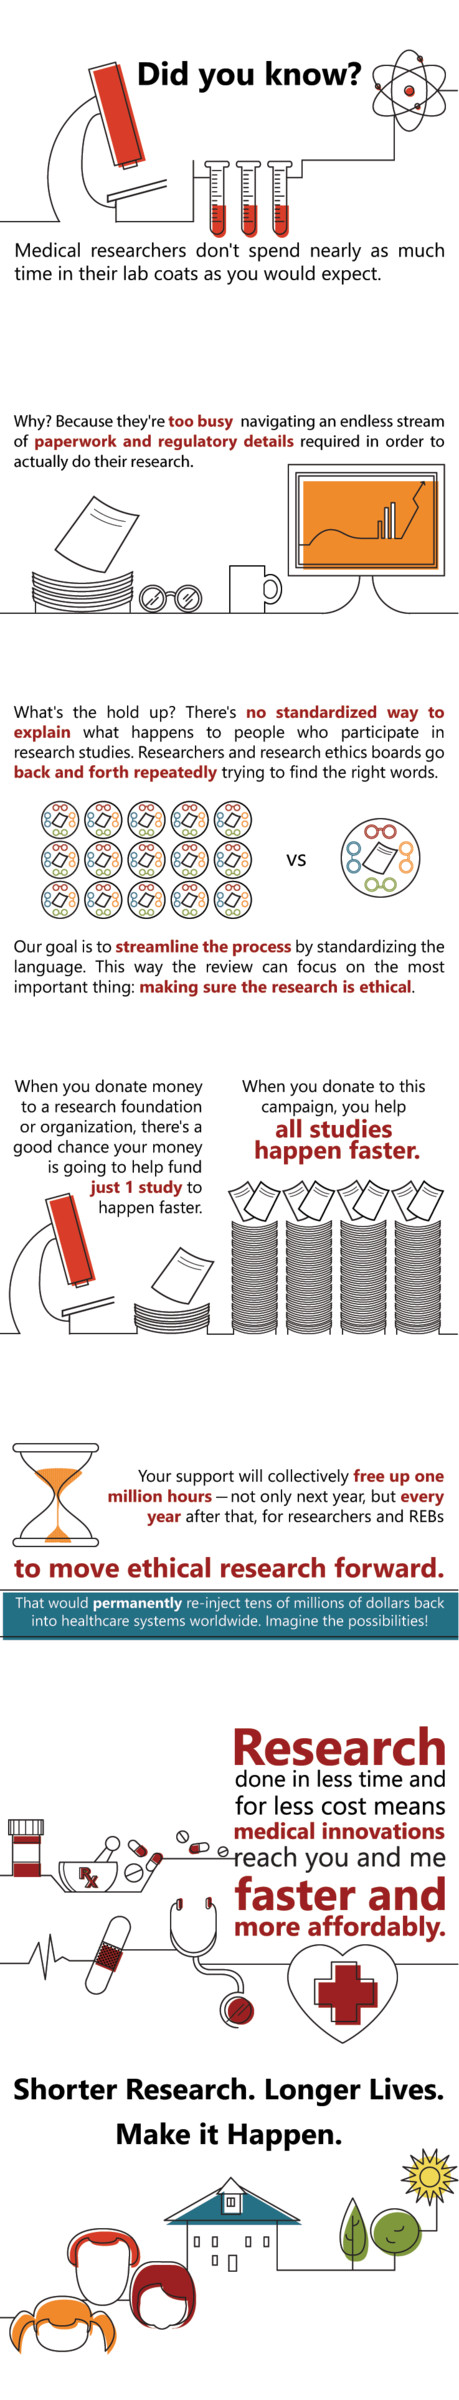 Infographic for One Million Hours: Shorter Research for Longer Lives crowdfunding campaign